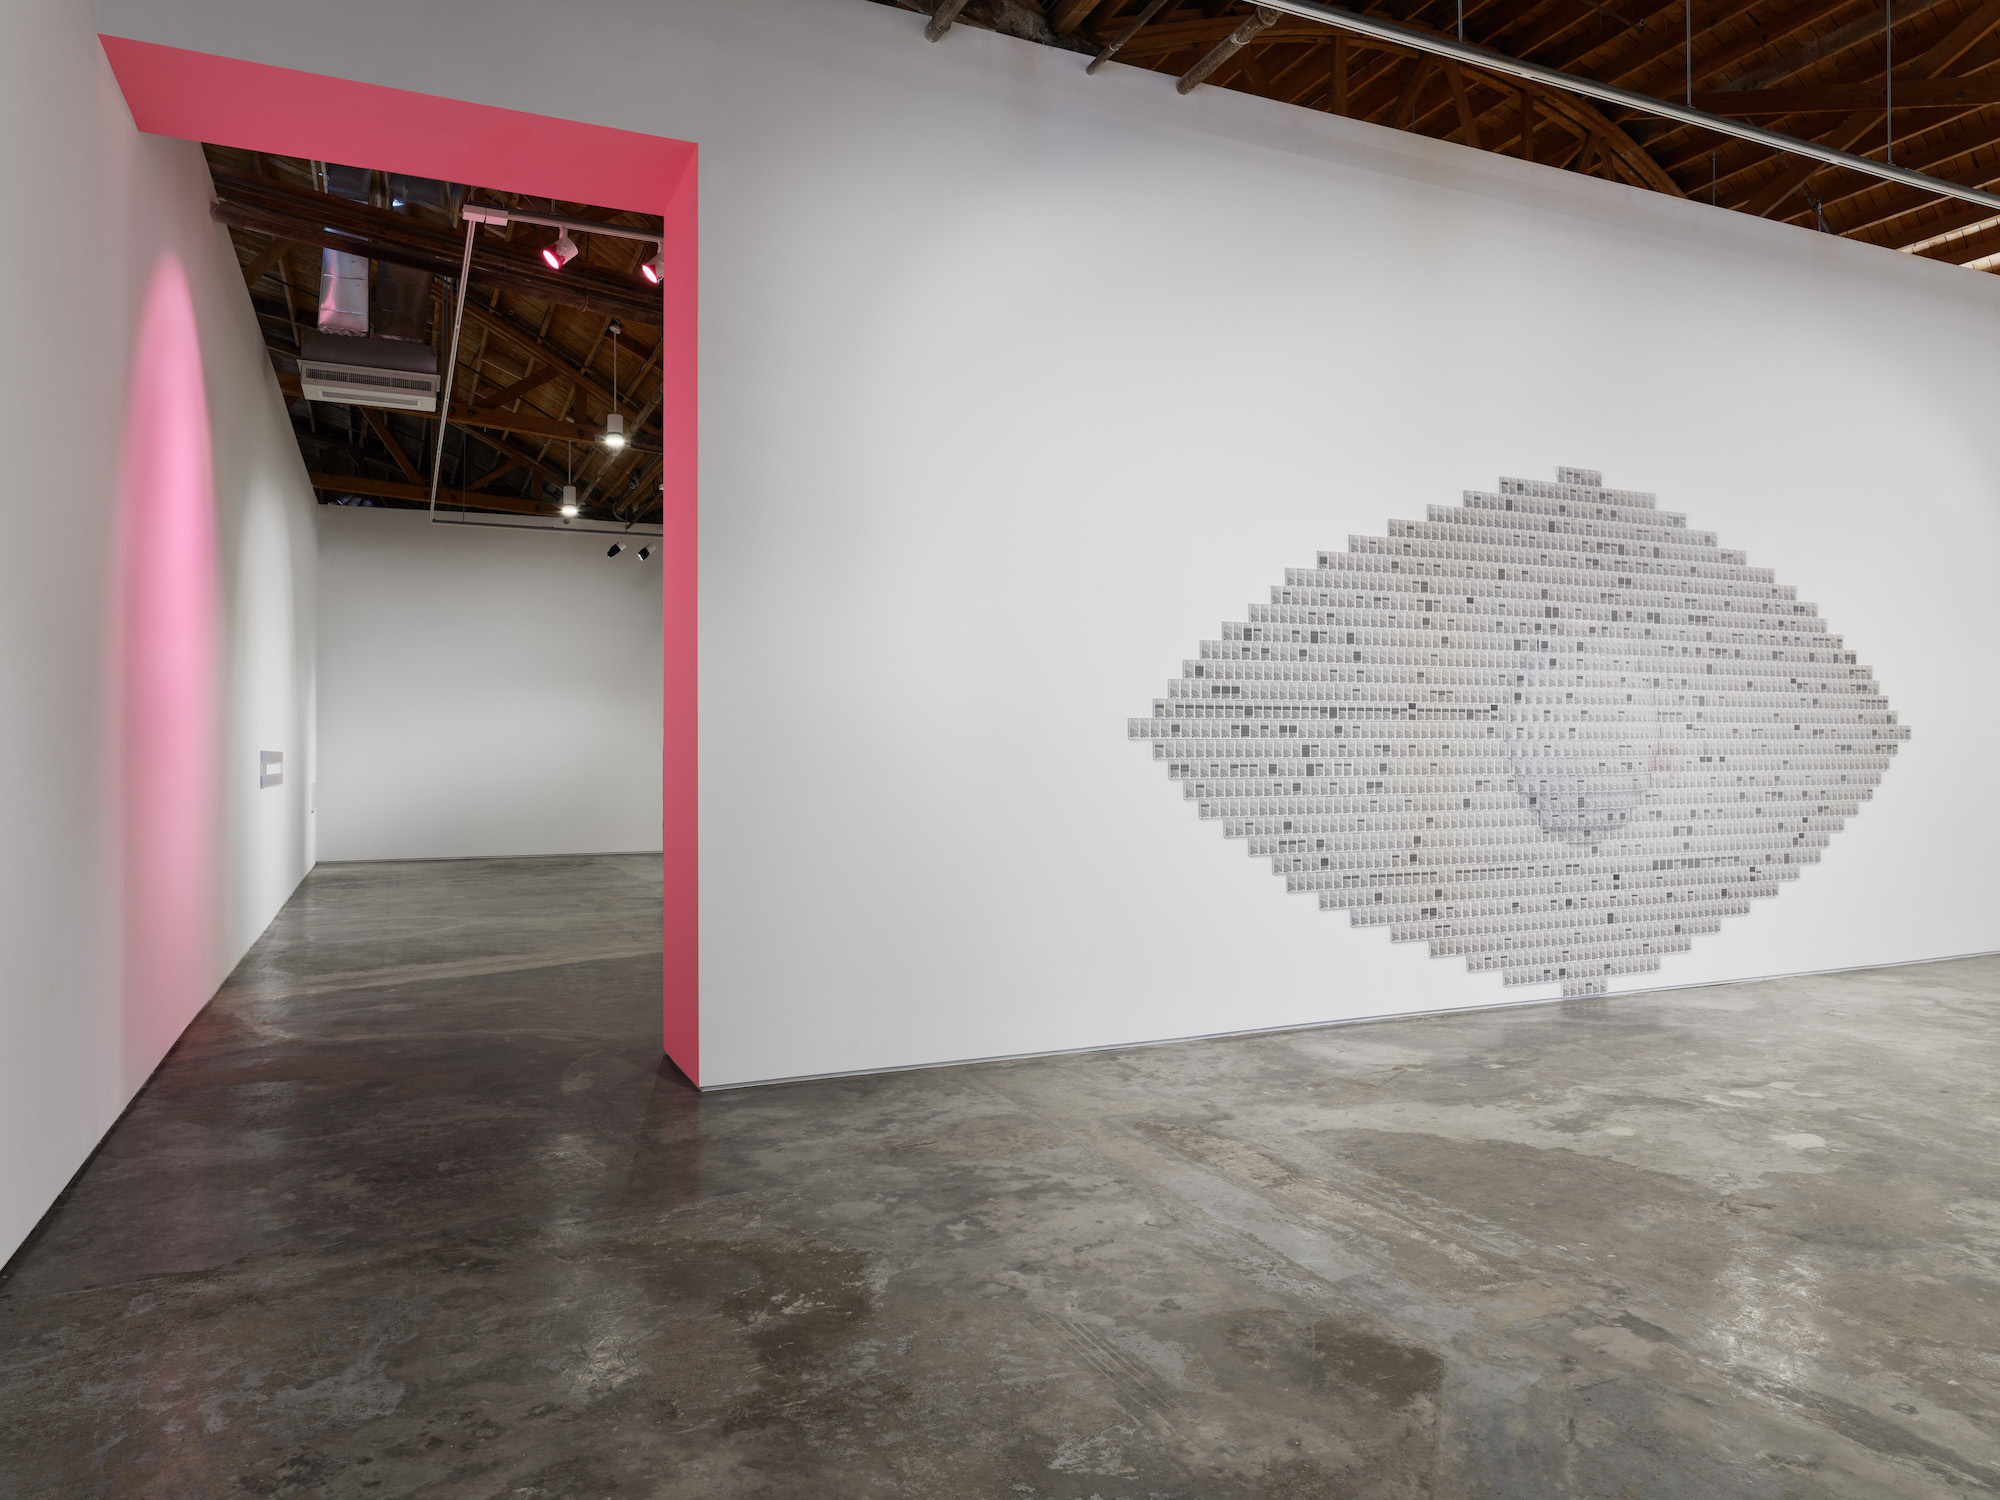 A pink strip of wall and ceiling connect two rooms of the gallery with a large eye made of dozens of tiny images hangs to the right.